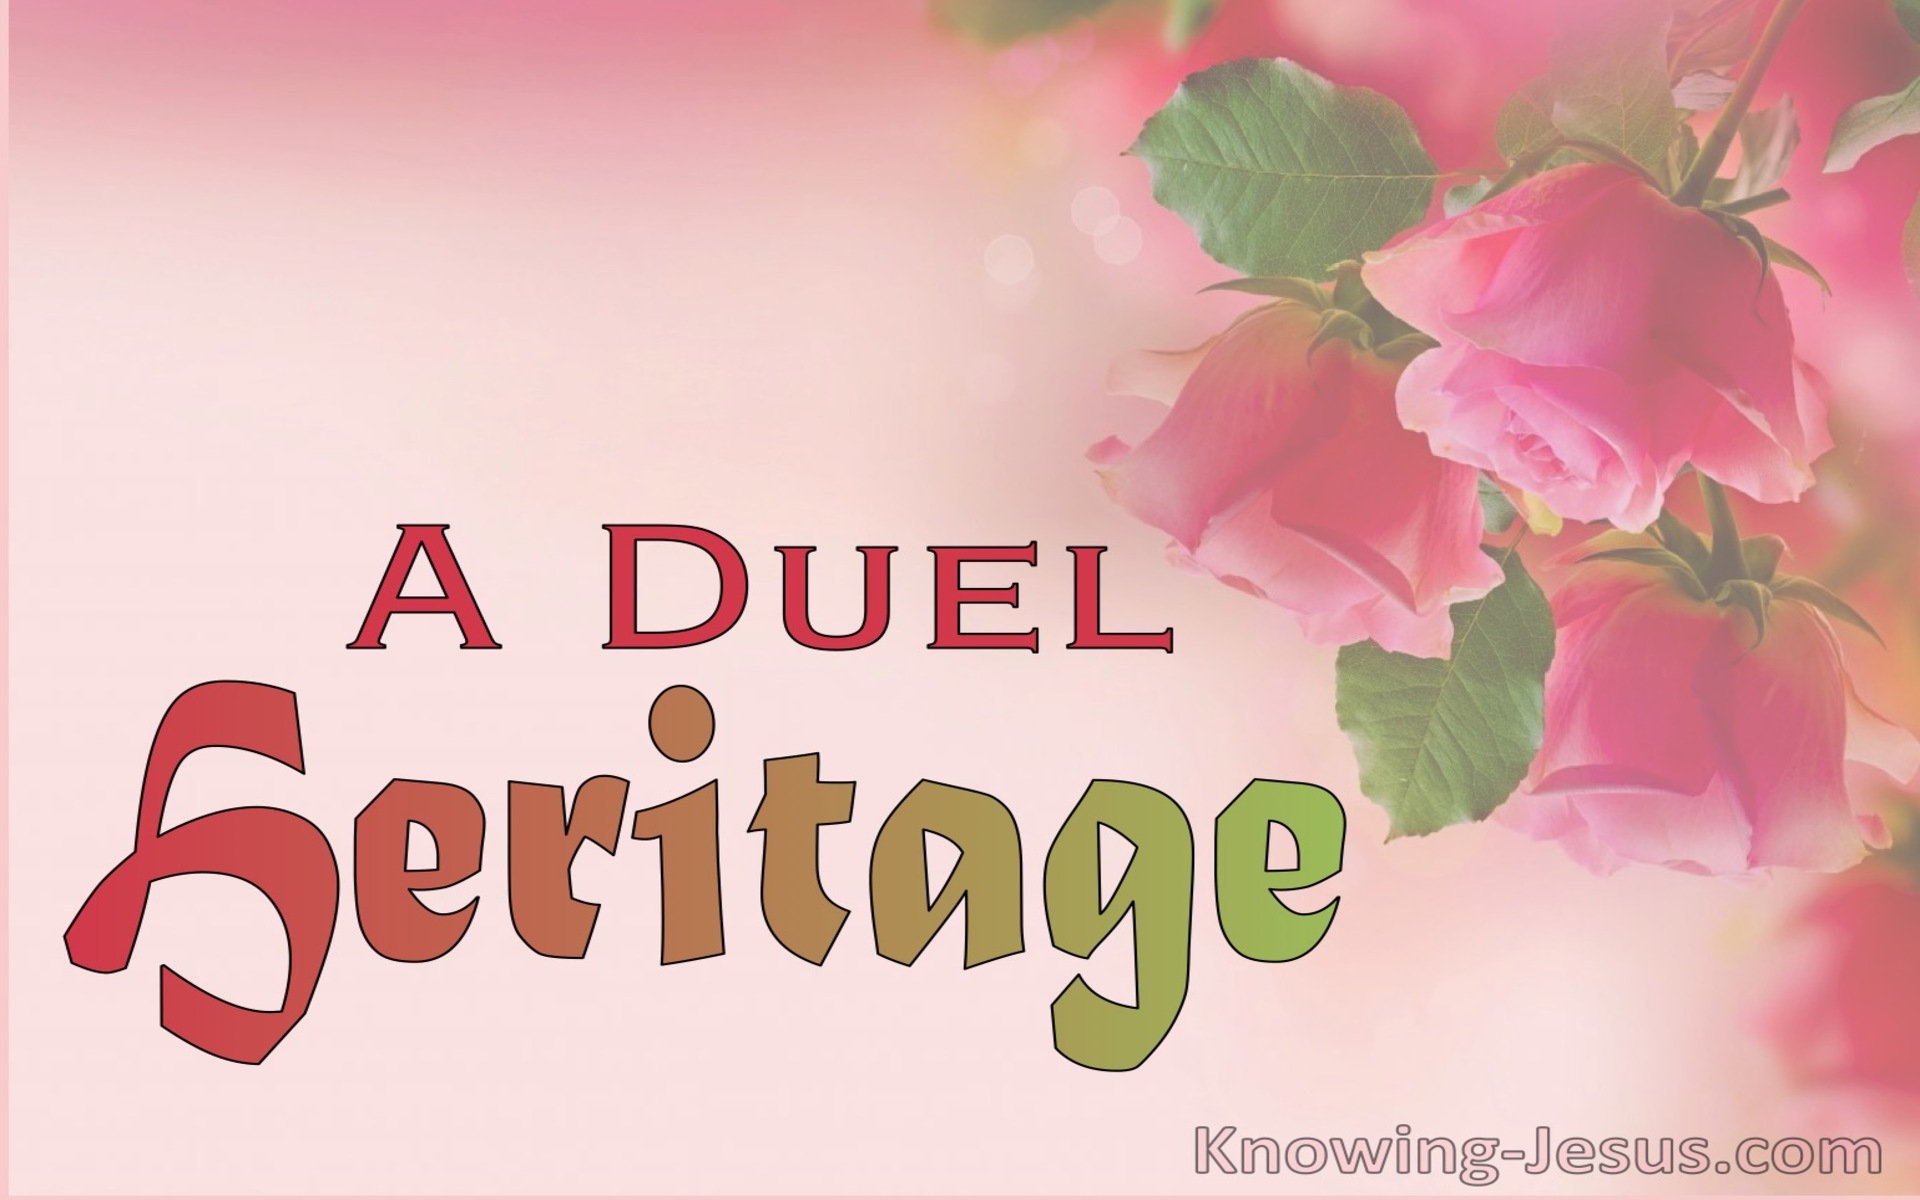 A Duel Heritage (devotional) (pink)